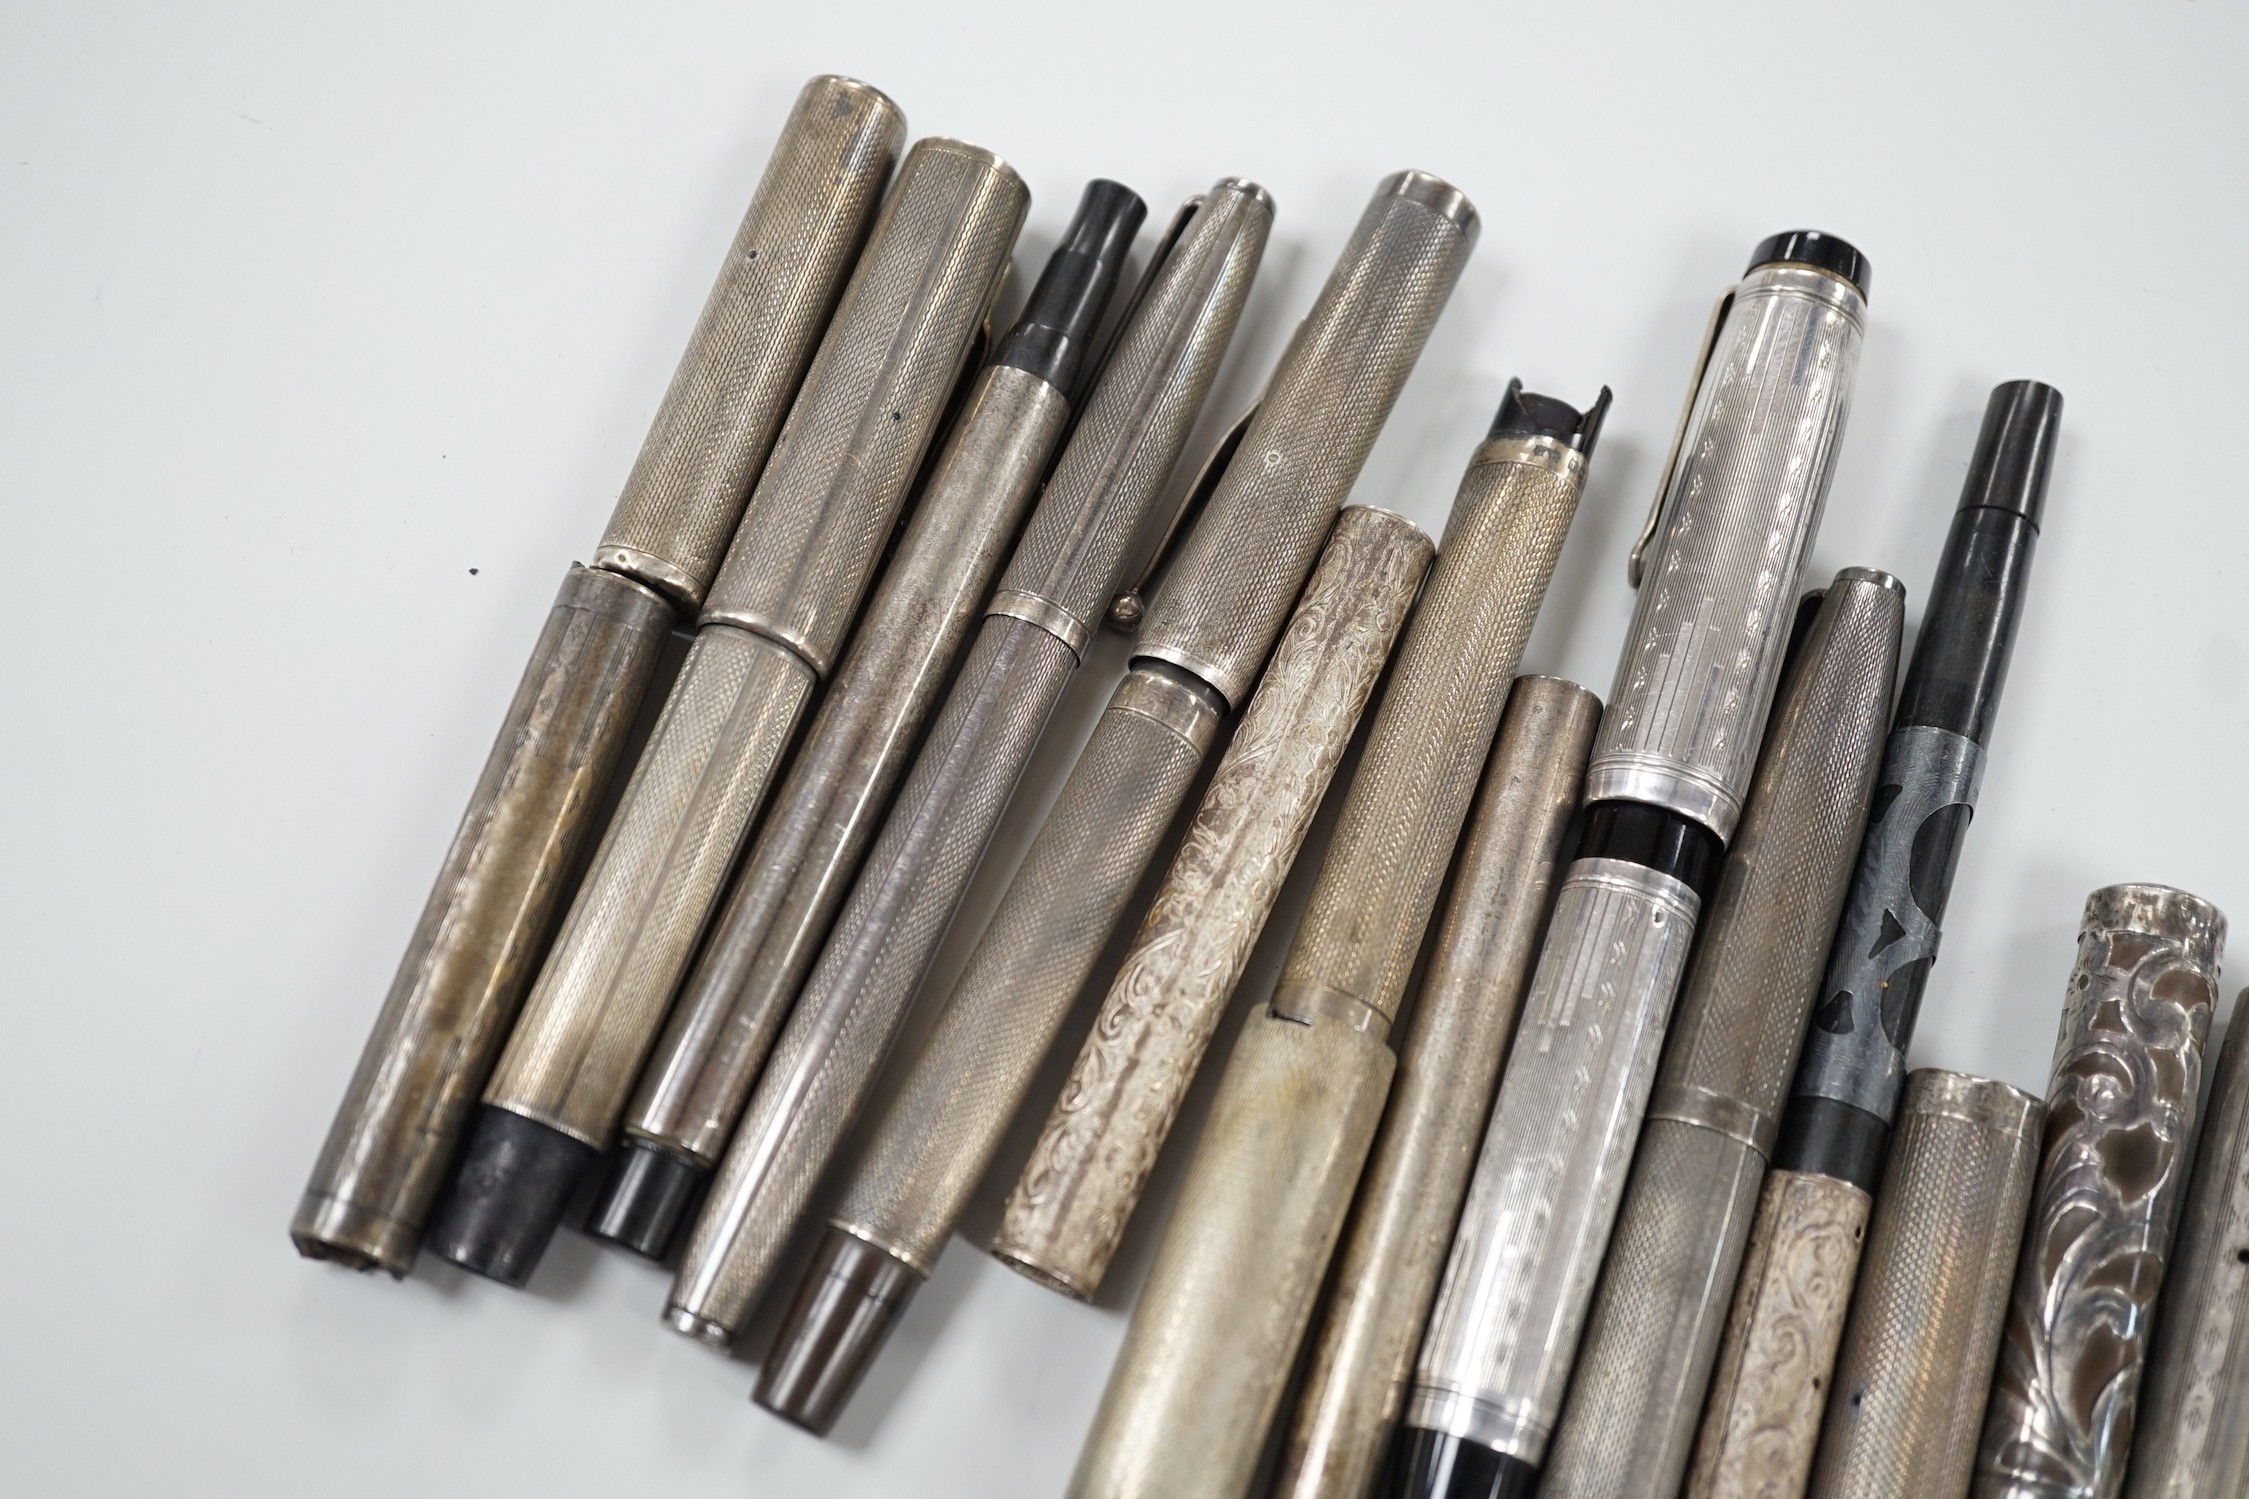 Silver fountain pens and parts